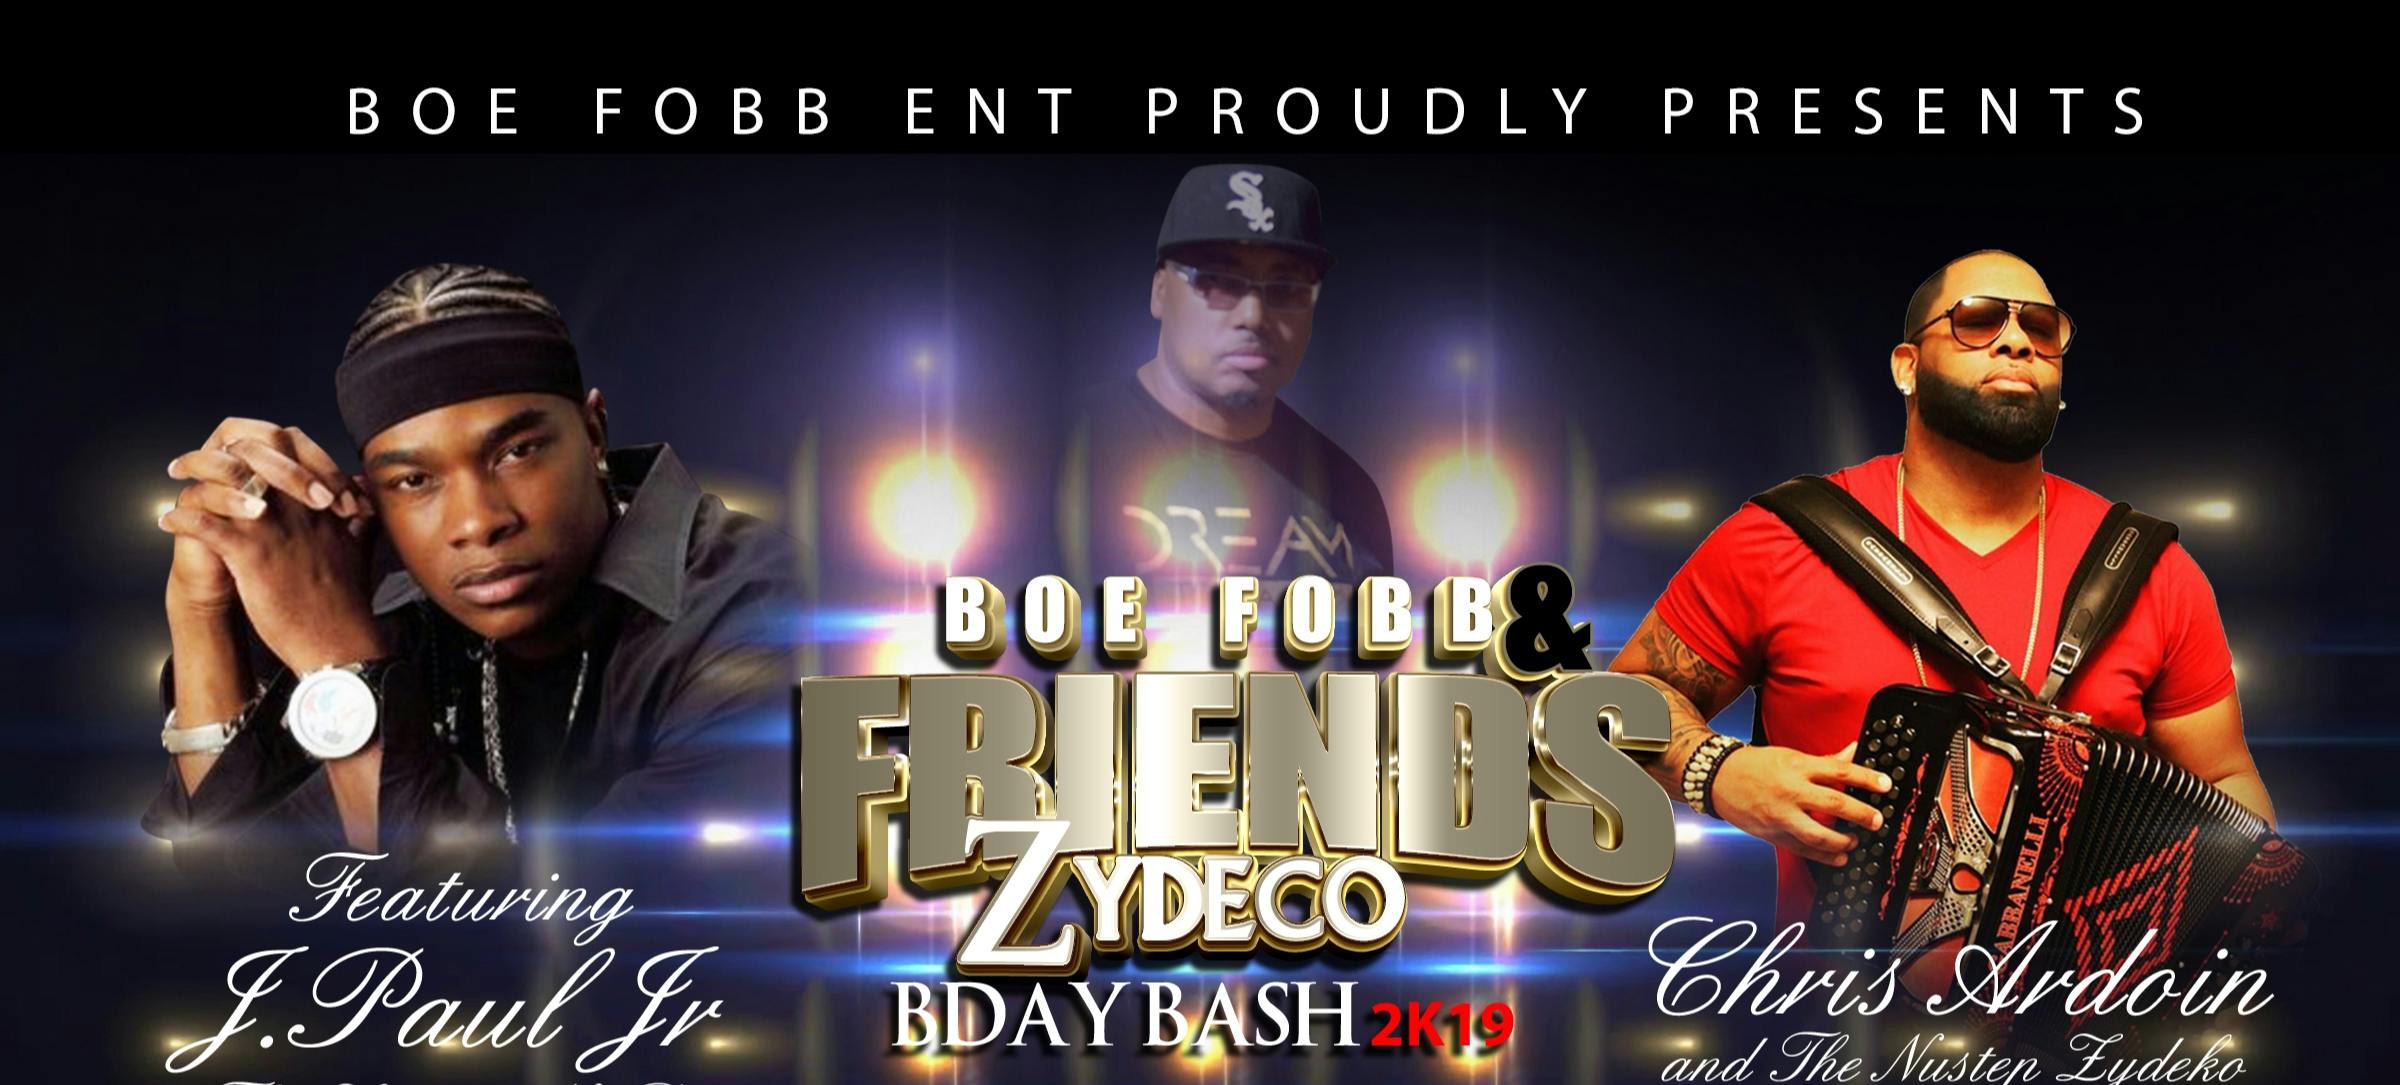 Boe Fobb and Friends Zydeco BDAY BASH 2K19 